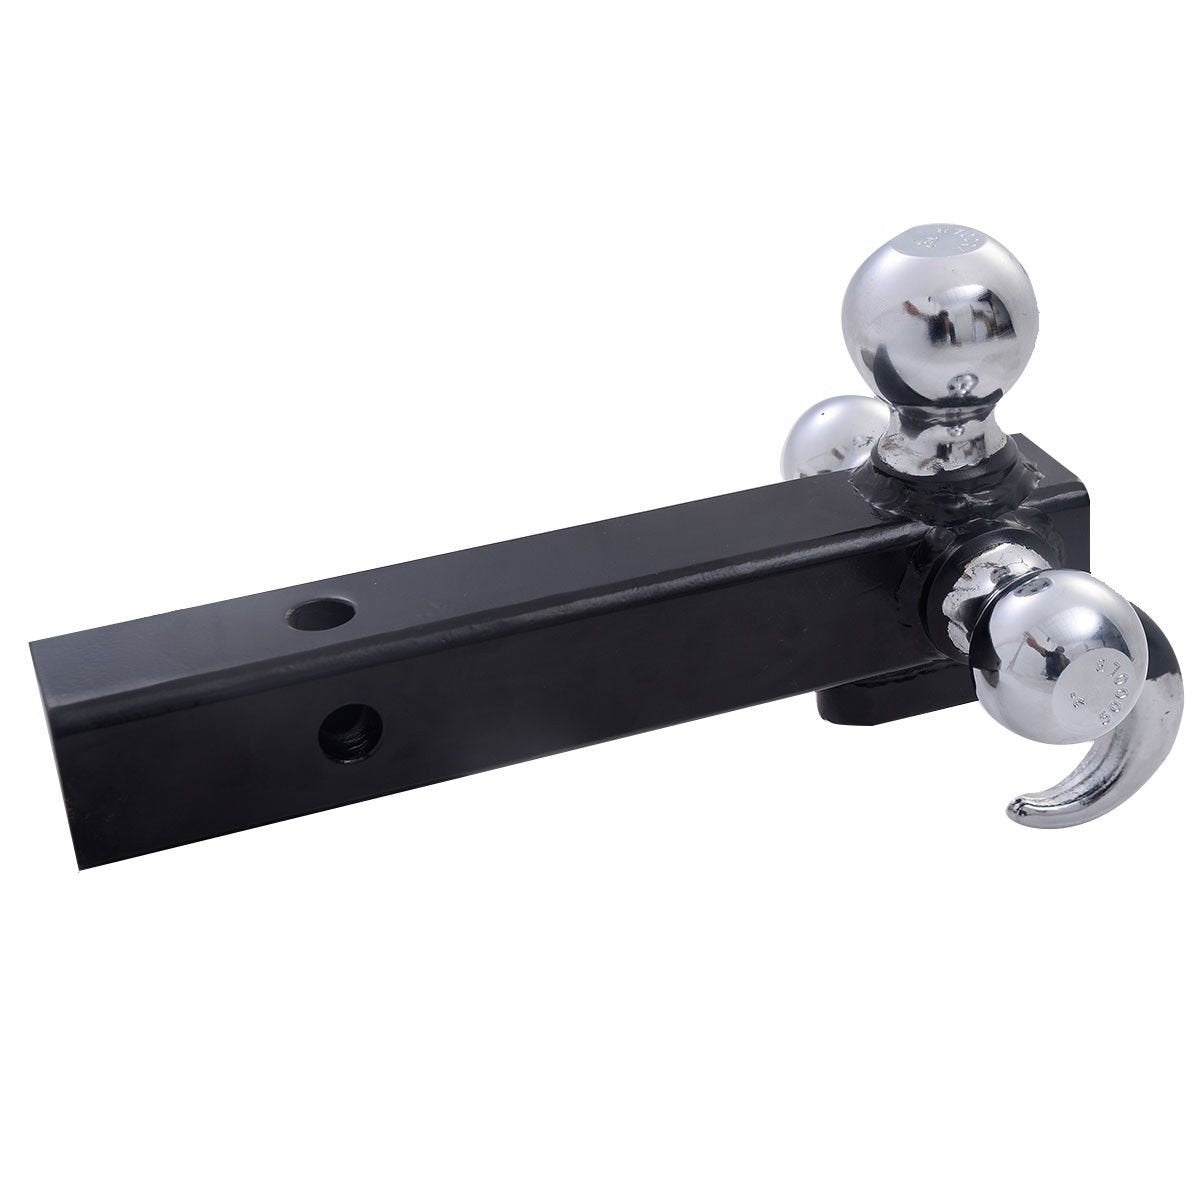 Triple 3 Ball Trailer tow Hitch Receiver Mount 1 7/8" 2" 2 5/16" Towing  w/ Hook